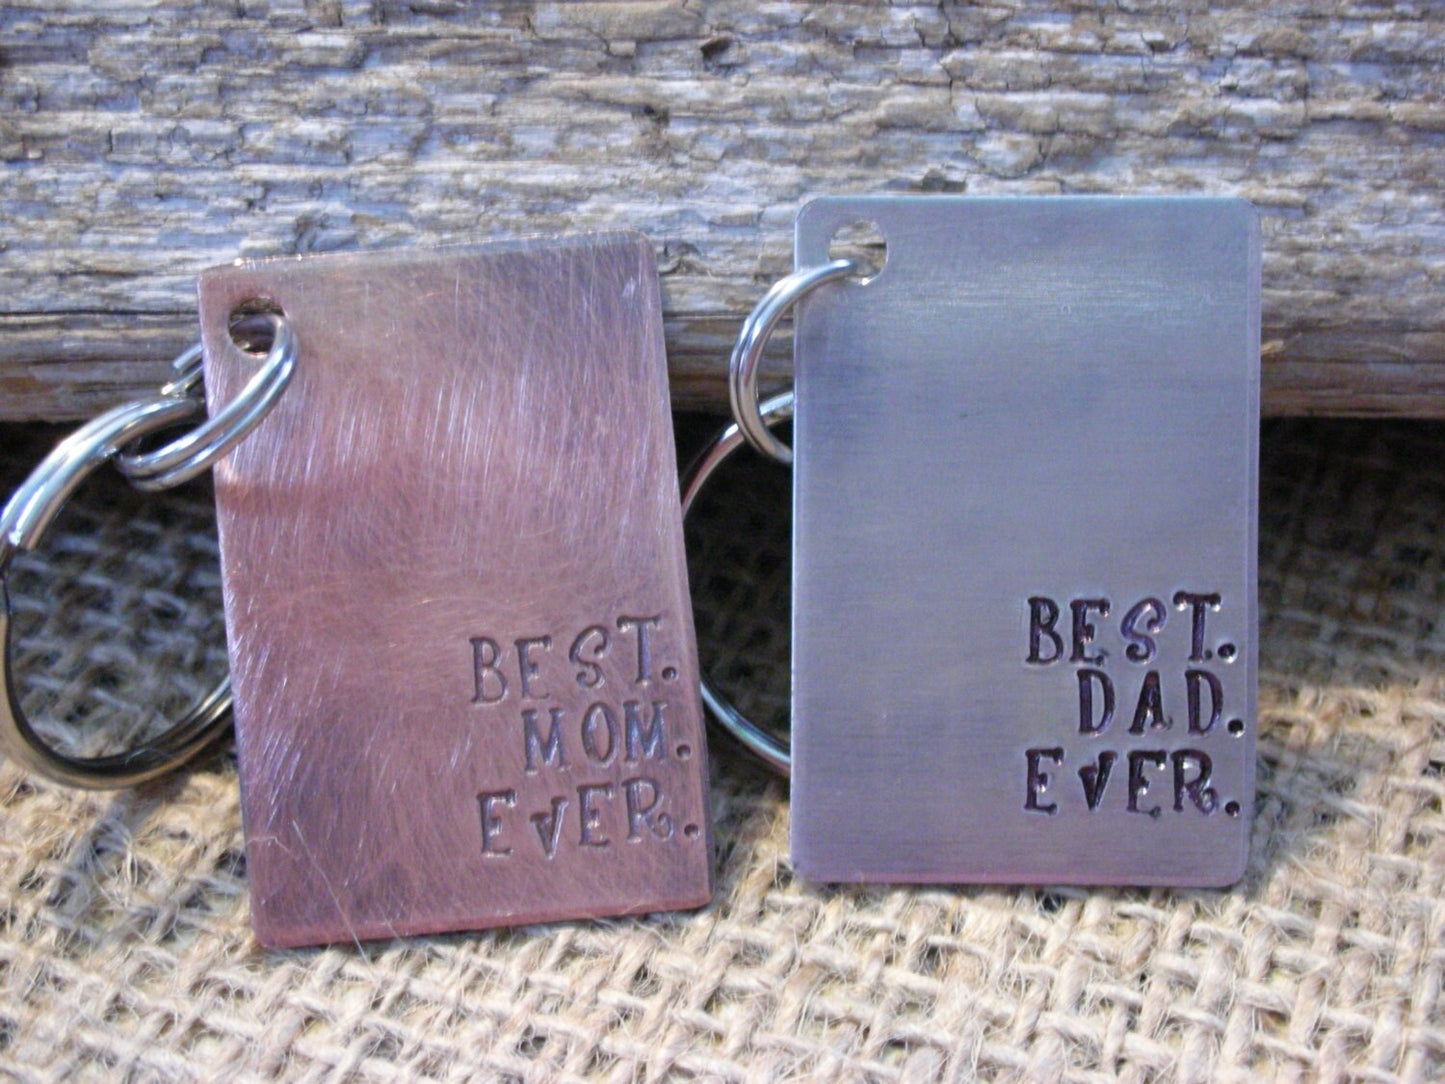 best.dad.ever. keychain -Fathers Day Keychain-Gift for Dad-Custom Handstamped Personalized Keychain